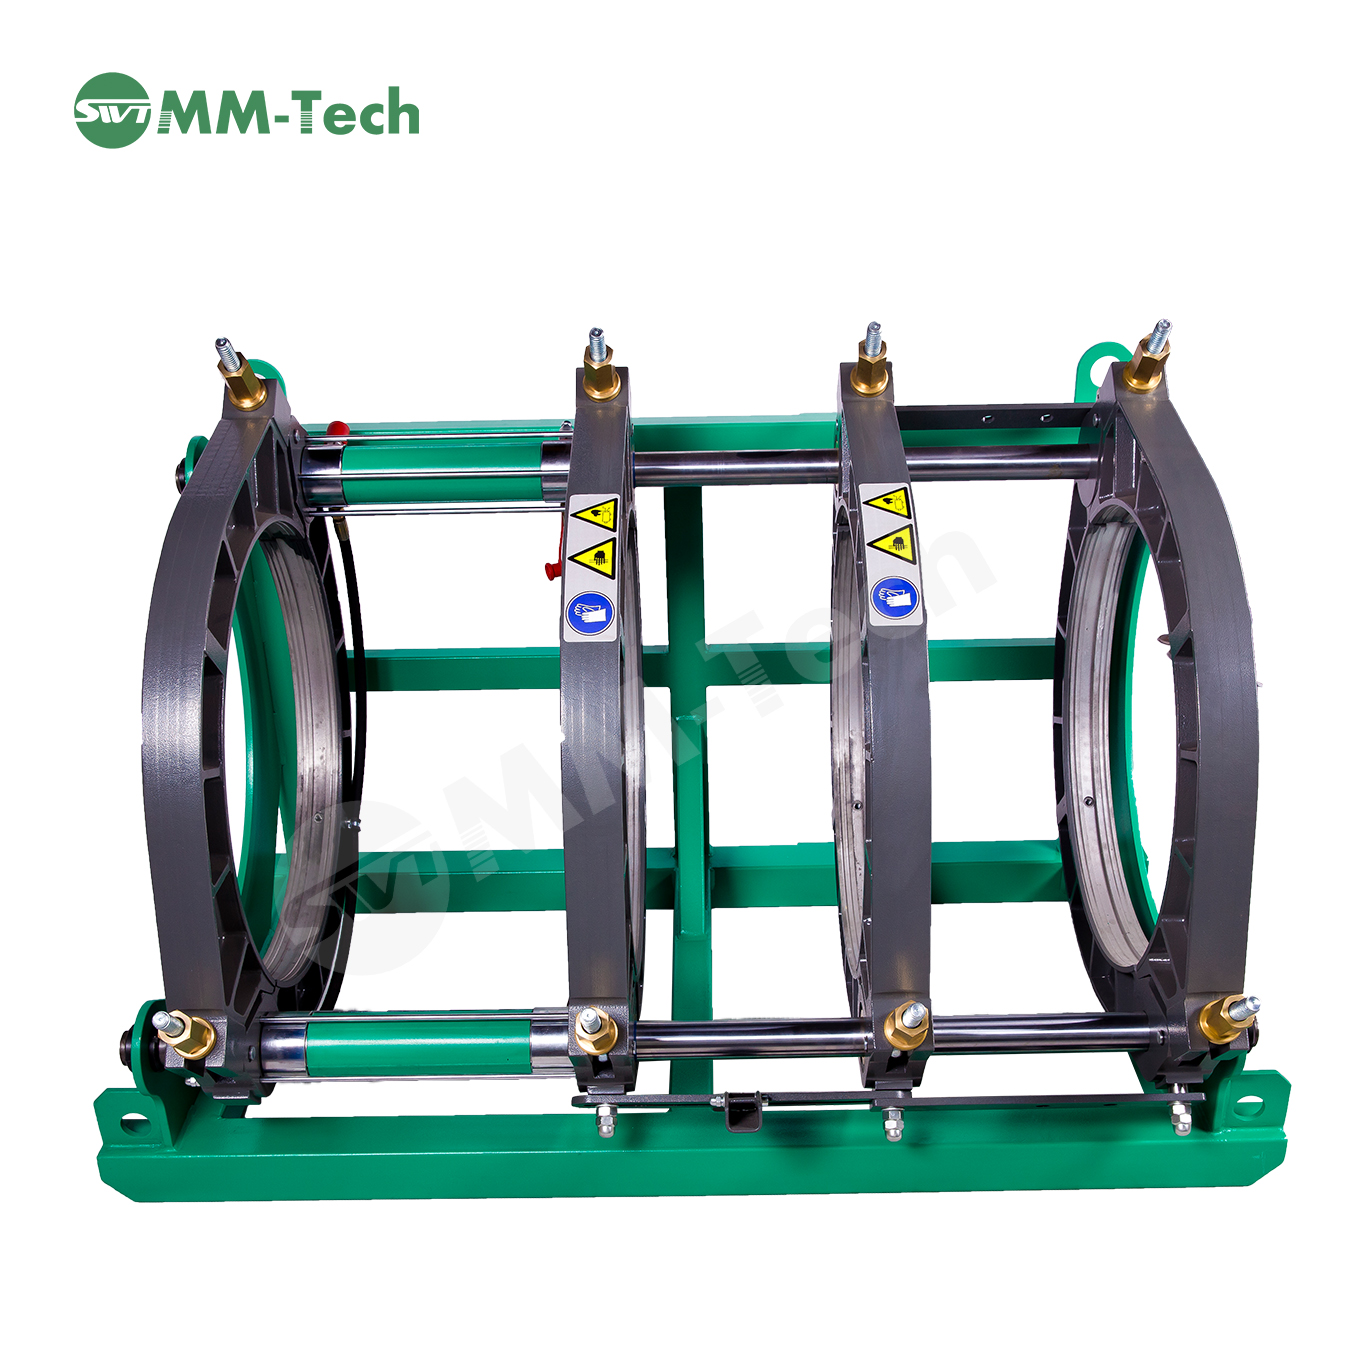 HDPE Pipe Jointing Machine